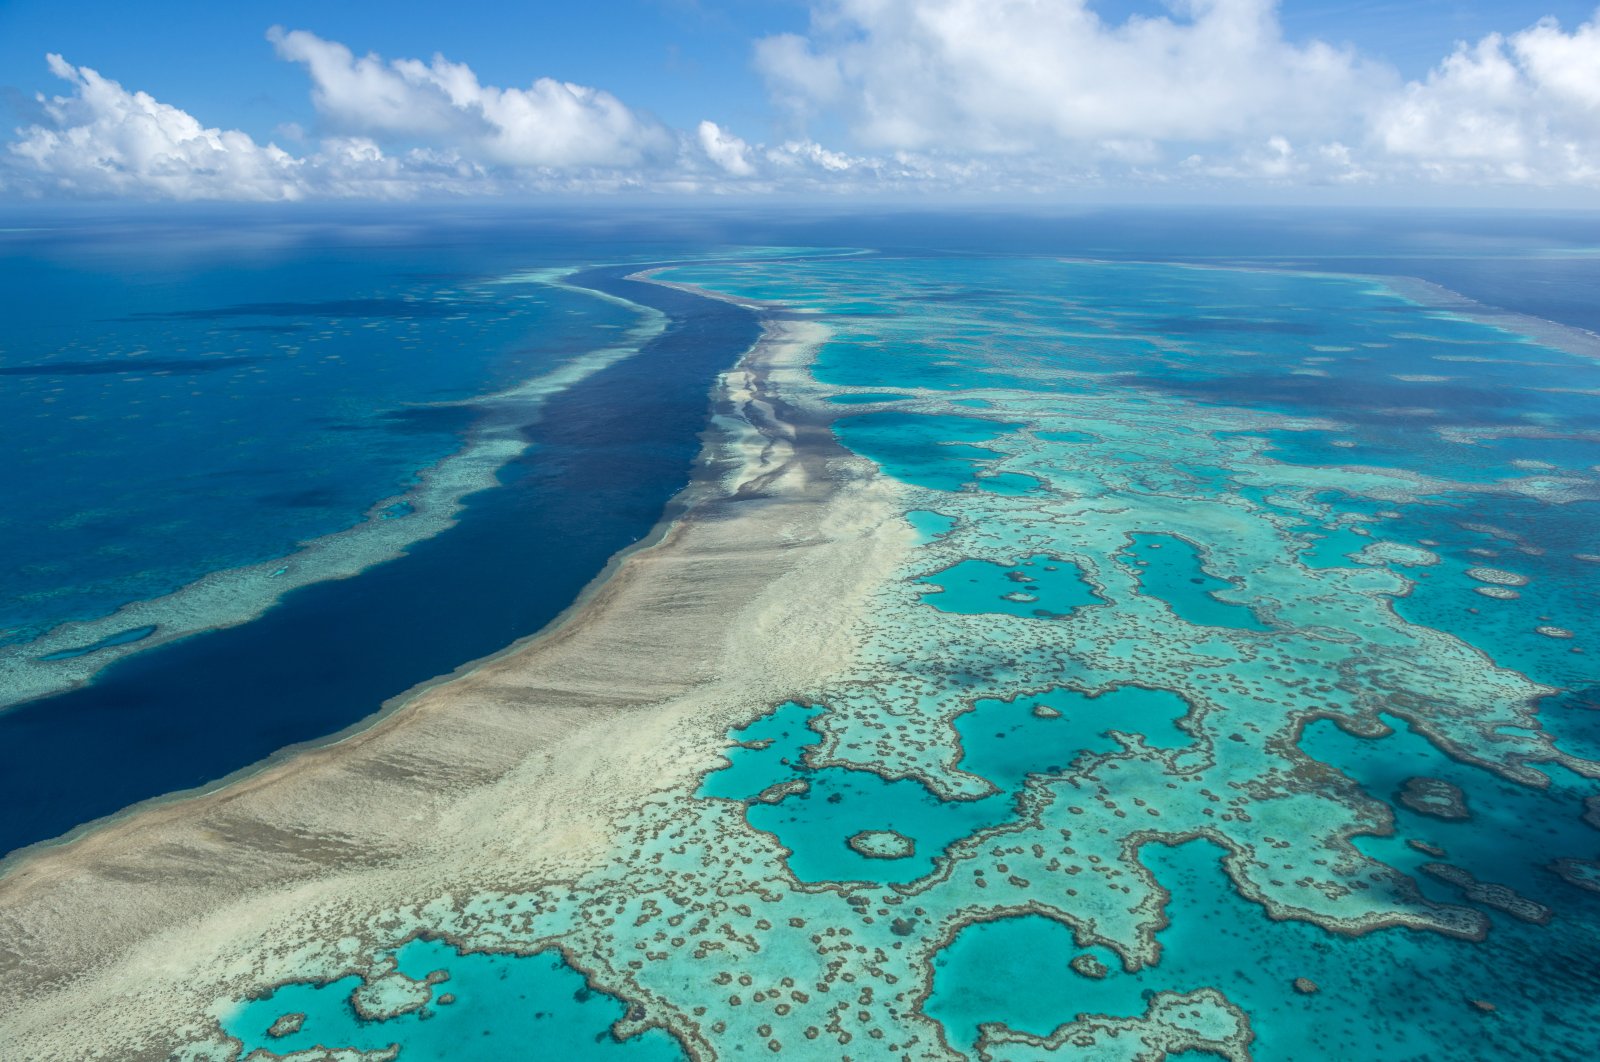 In this photo provided by the Great Barrier Reef Marine Park Authority, the Hardy Reef is viewed from the air near the Whitsunday Islands, Australia, June 22, 2014. (Jumbo Aerial Photography/Great Barrier Reef Marine Park Authority via AP)